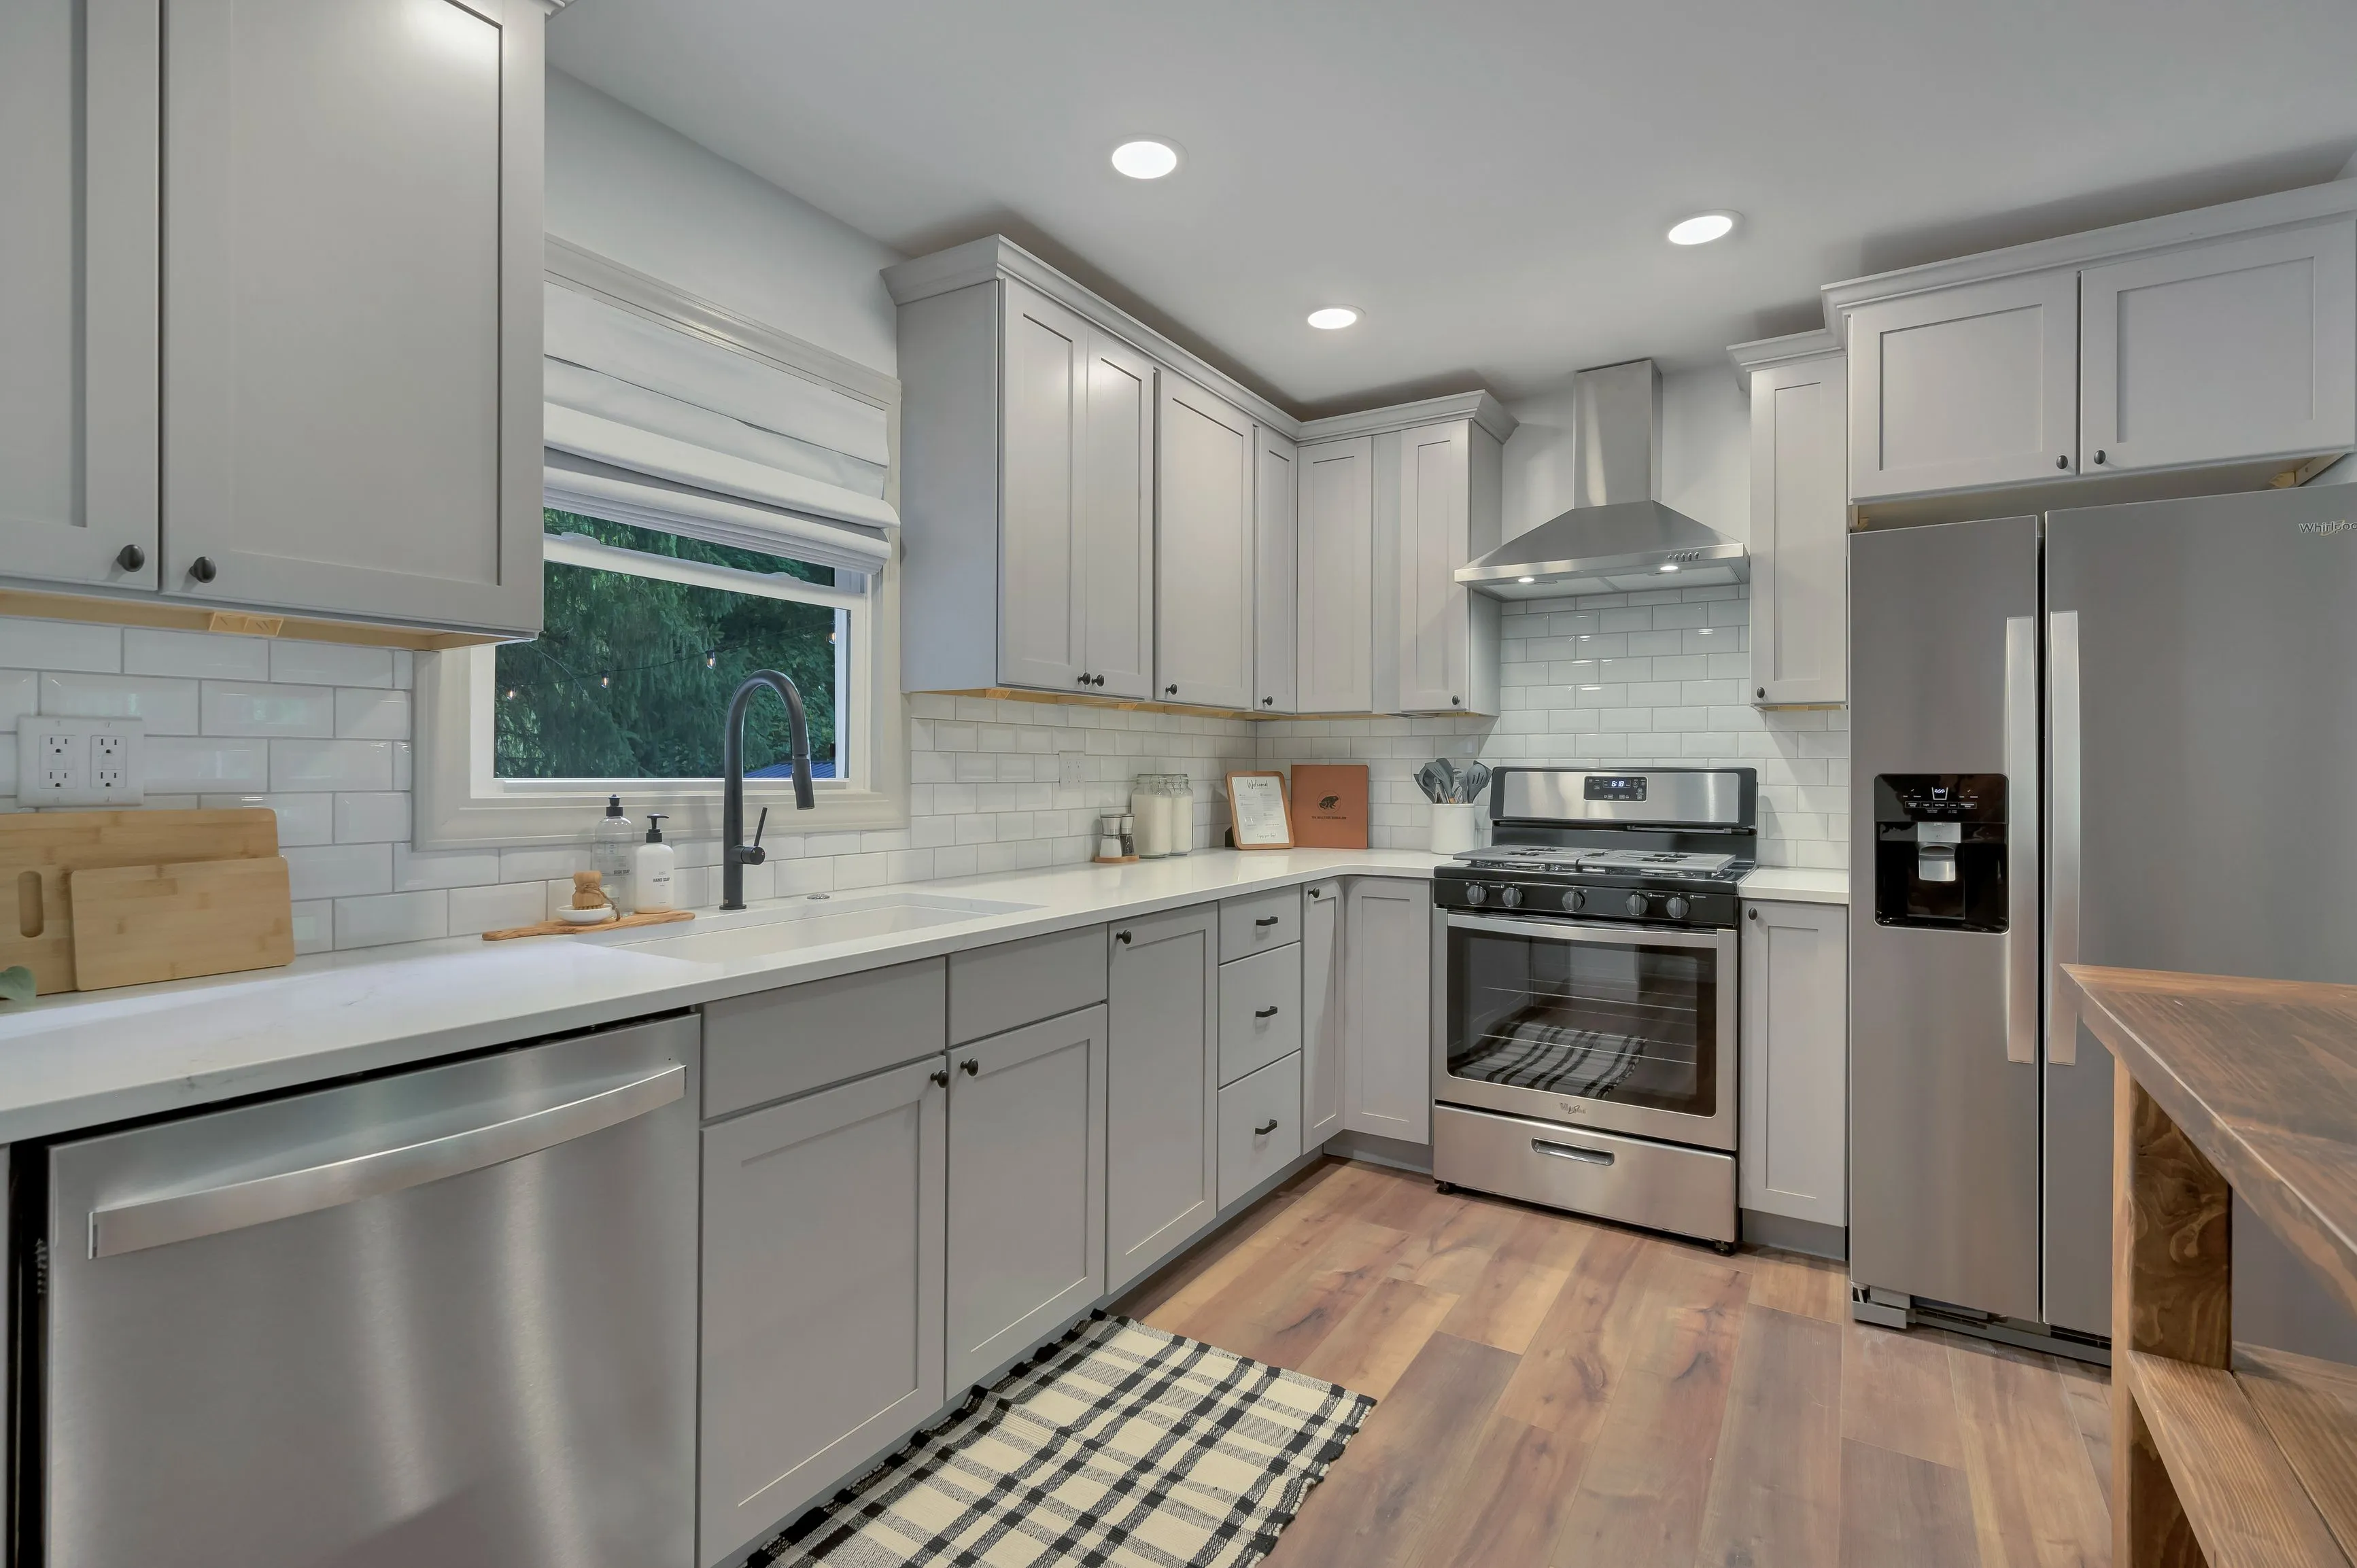 Modern kitchen interior with white cabinetry, stainless steel appliances, subway tile backsplash, and wood flooring.